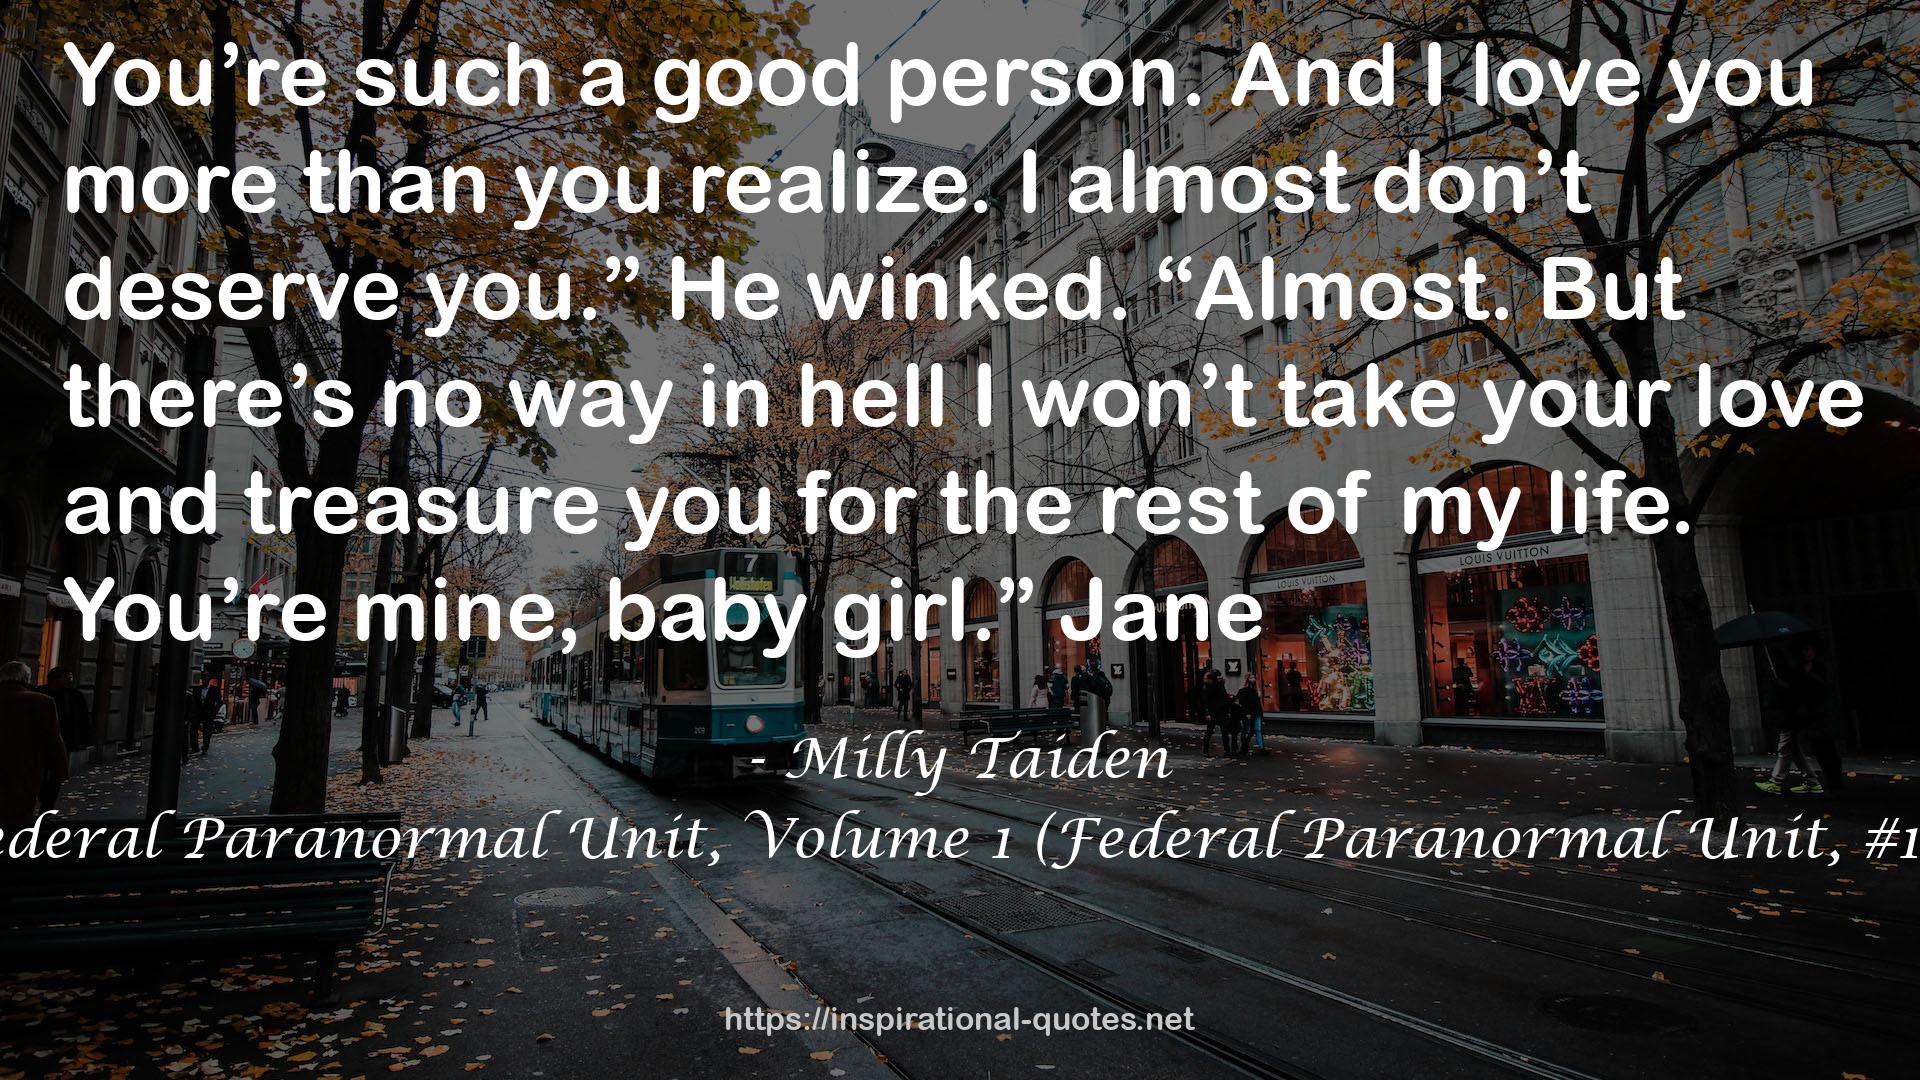 Federal Paranormal Unit, Volume 1 (Federal Paranormal Unit, #1-3) QUOTES